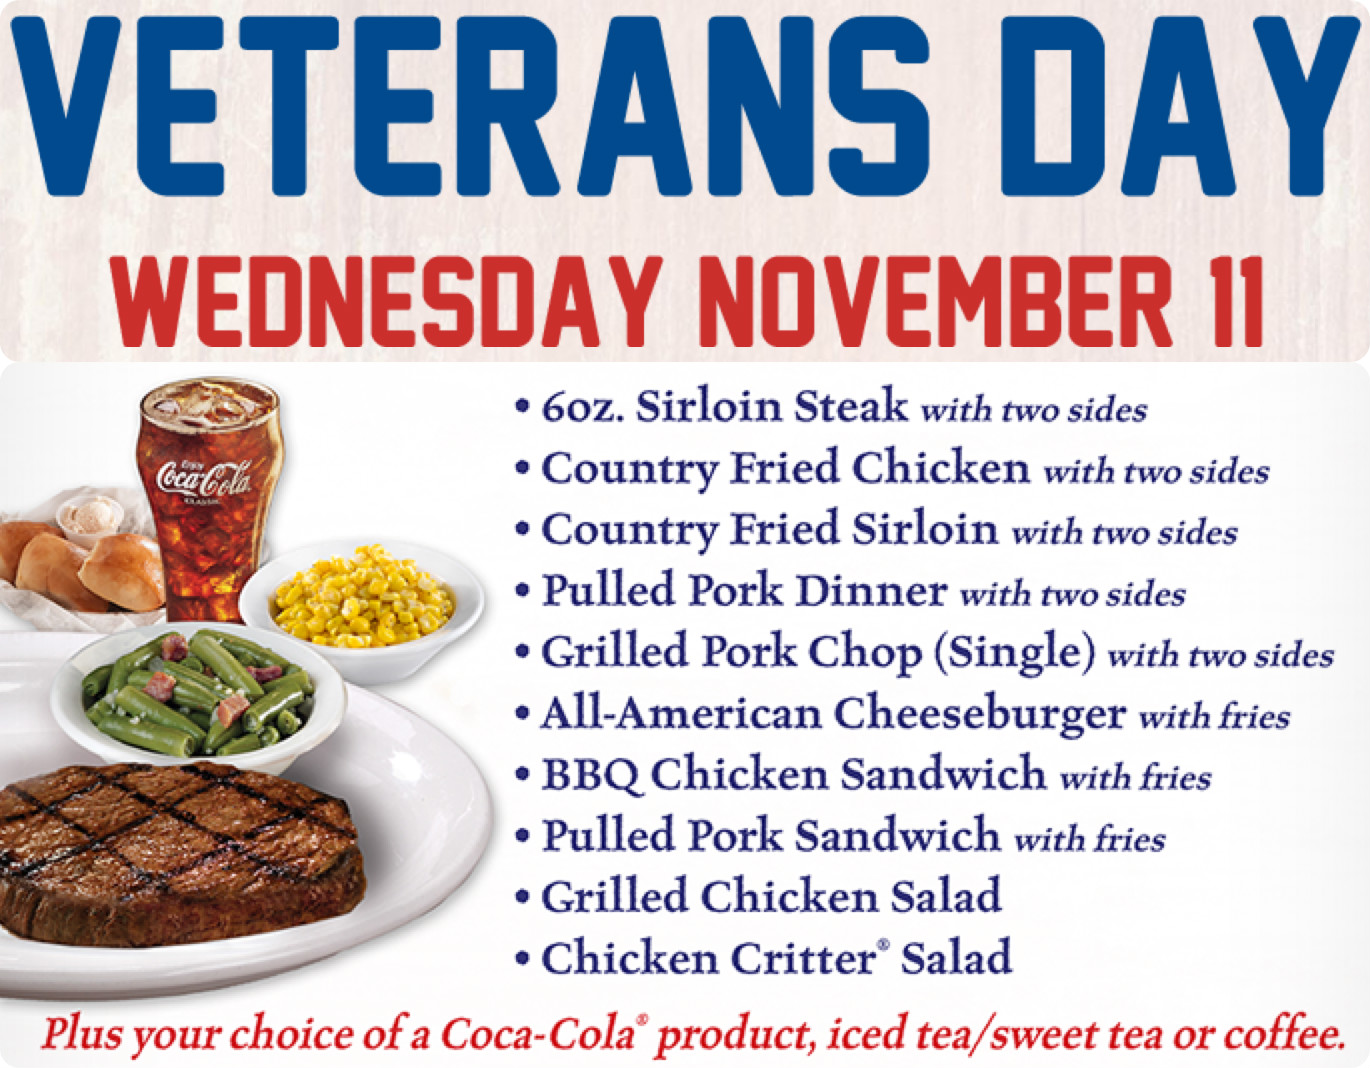 Texas Roadhouse FREE Lunch for Veterans & Active Duty Military on November 11th